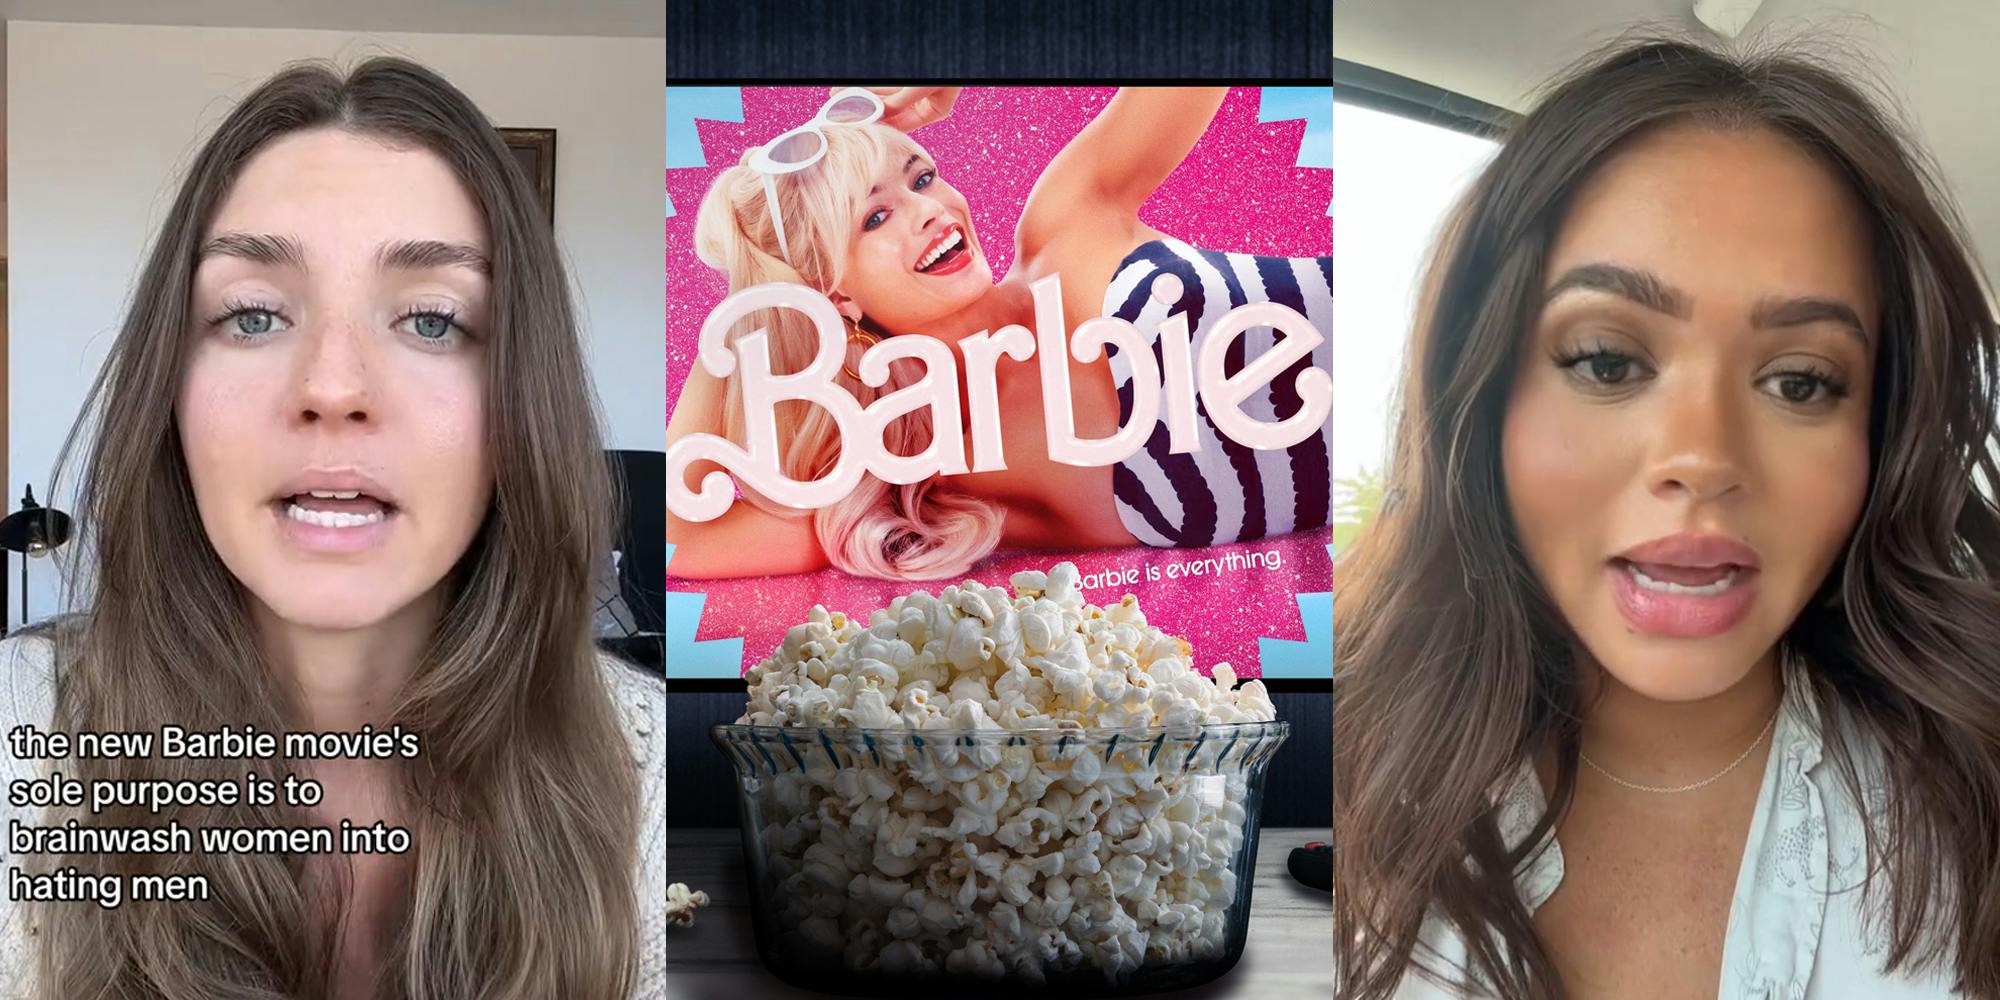 woman speaking with caption "the new Barbie movie's sole purpose is to brainwash women into hating men" (l) Barbie movie on TV in front of bowl of popcorn on coffee table (c) woman speaking (r)